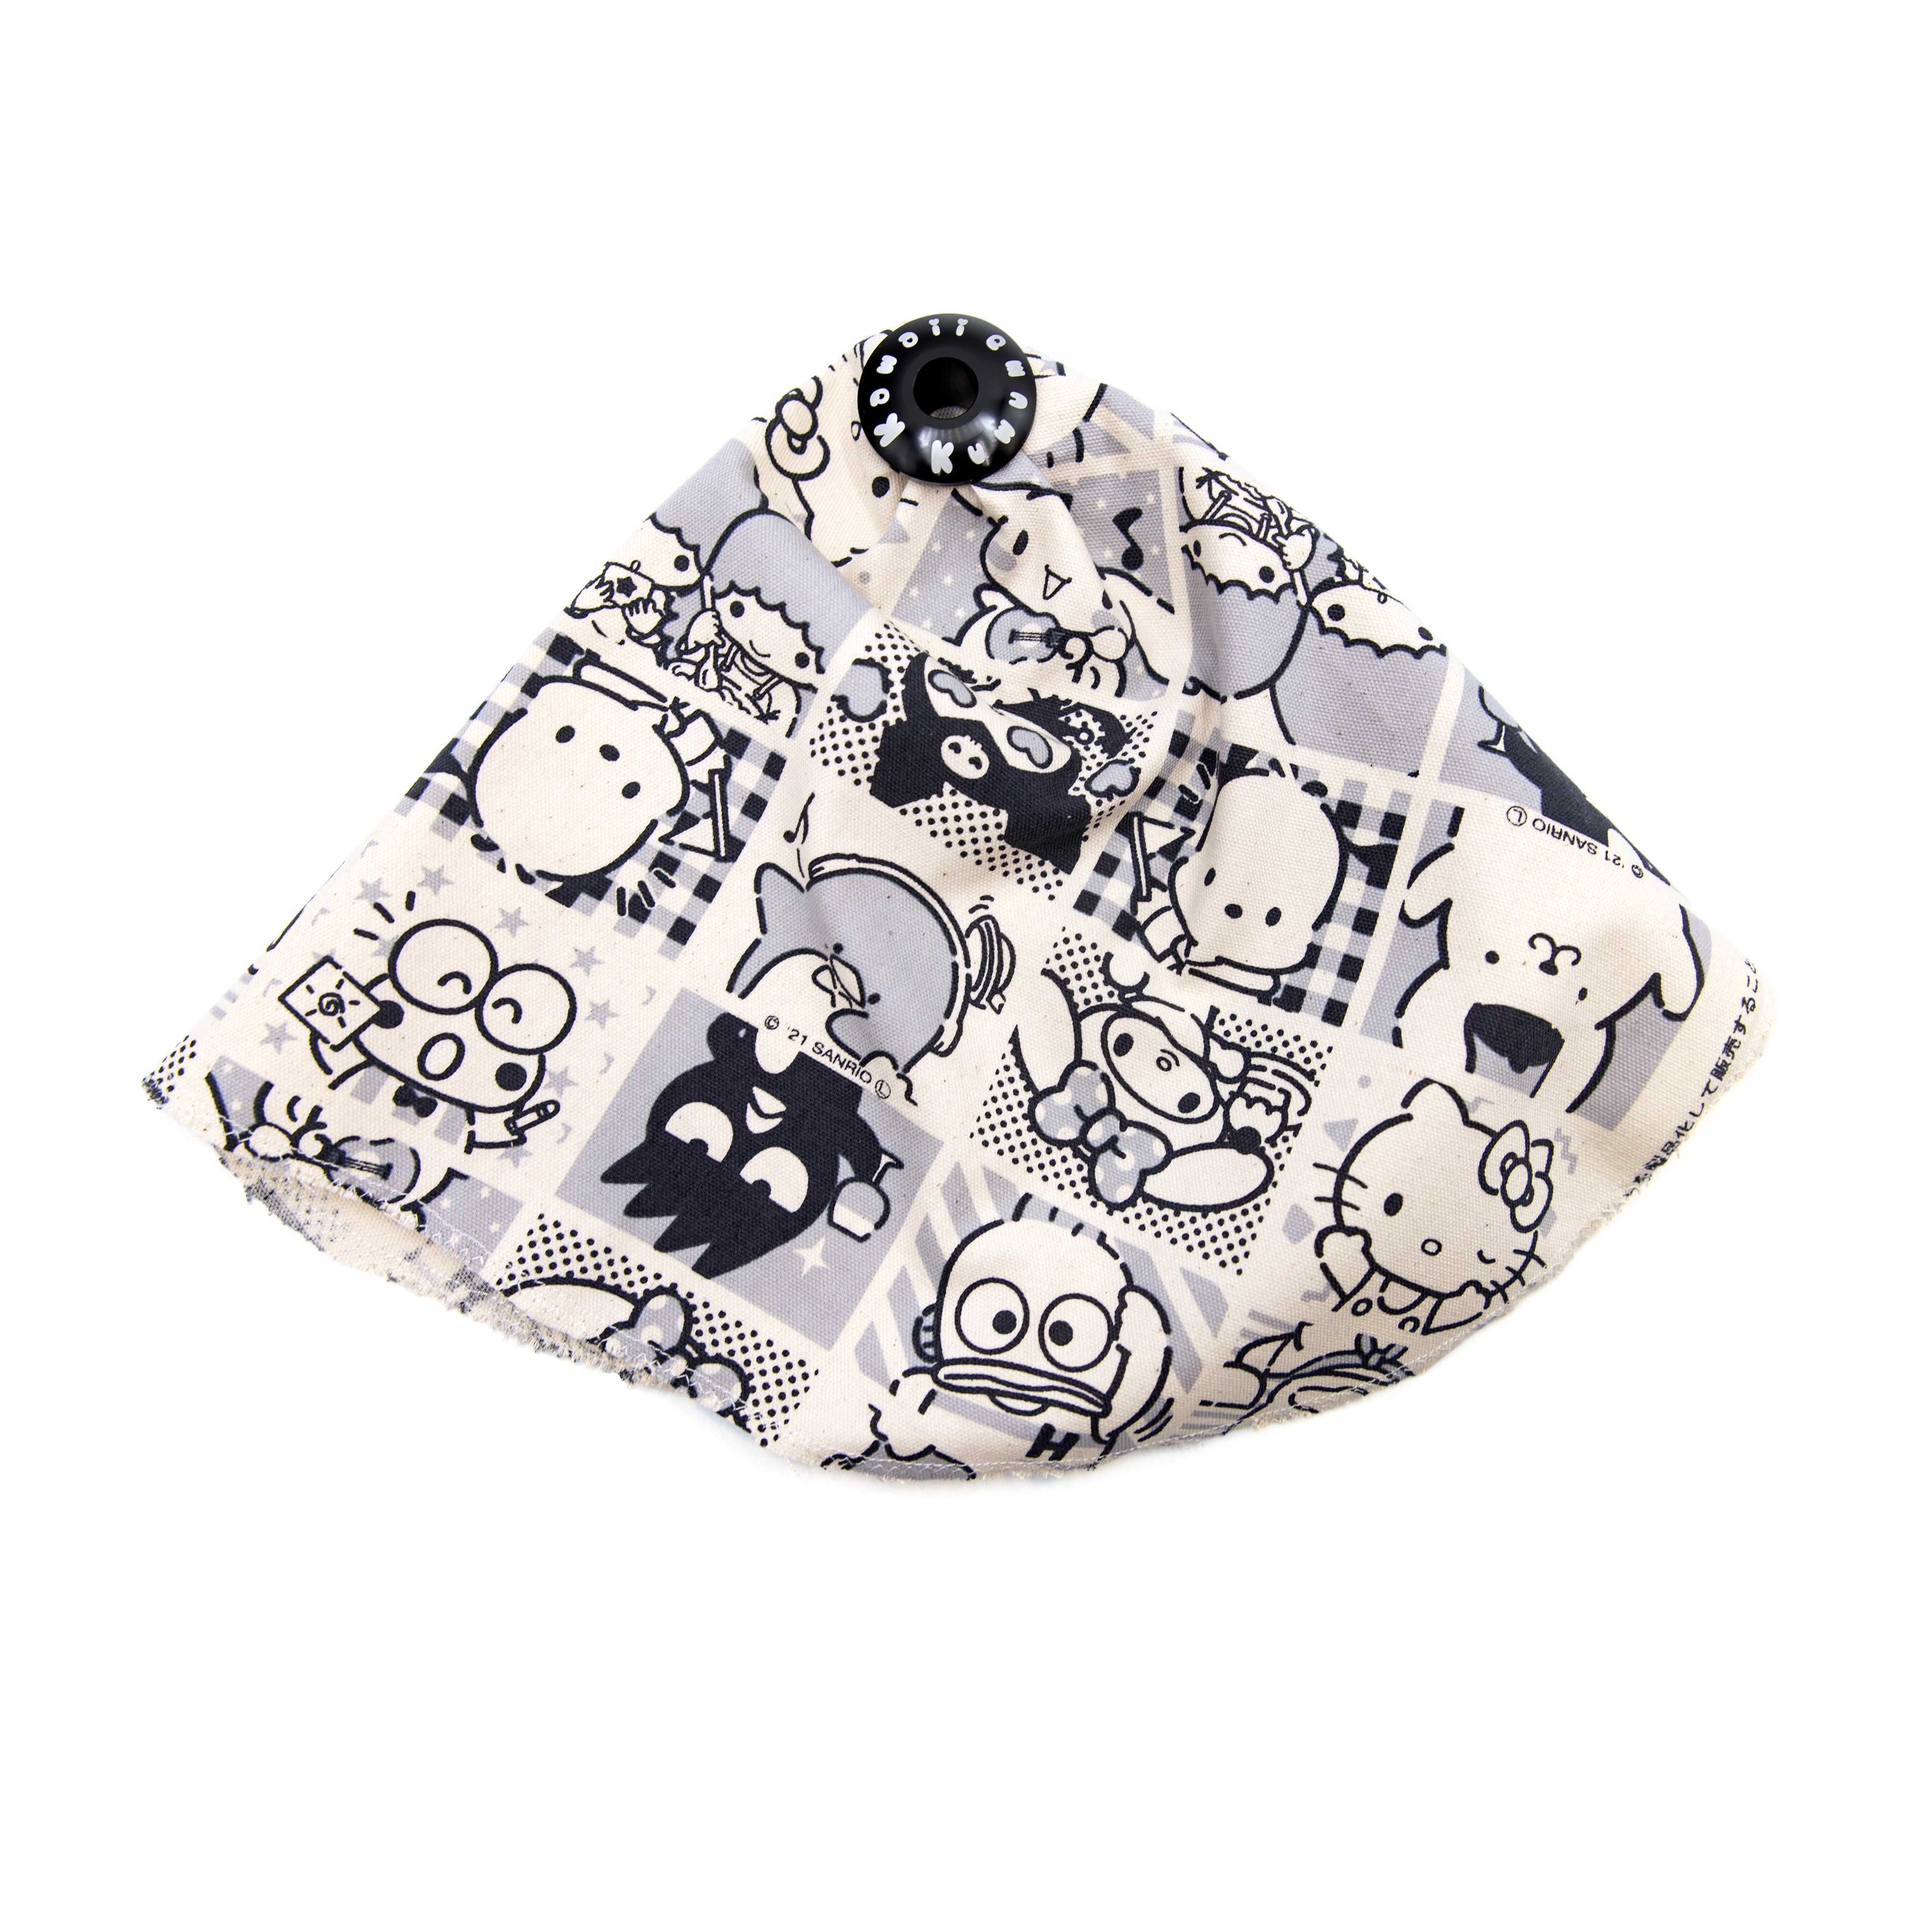 Hello Kitty and Friends Shift Boot Cover Monochrome Edition